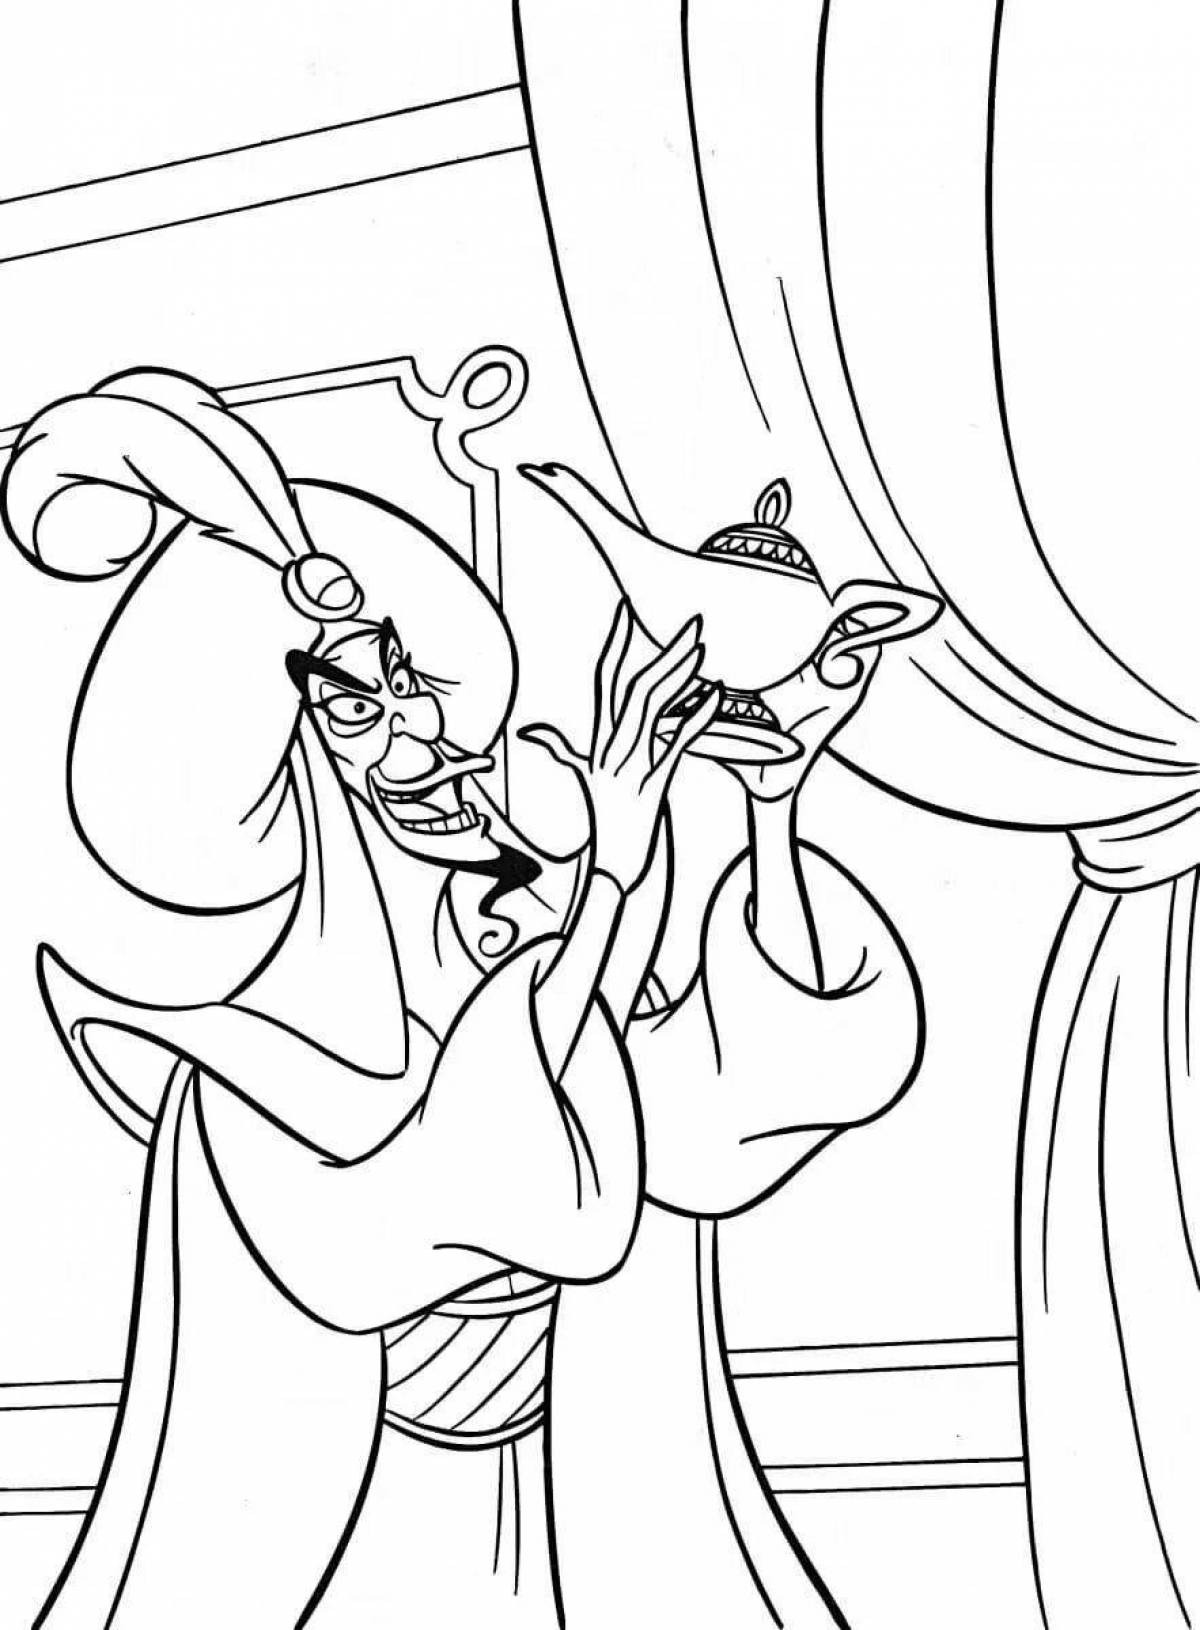 Awesome Aladdin coloring book